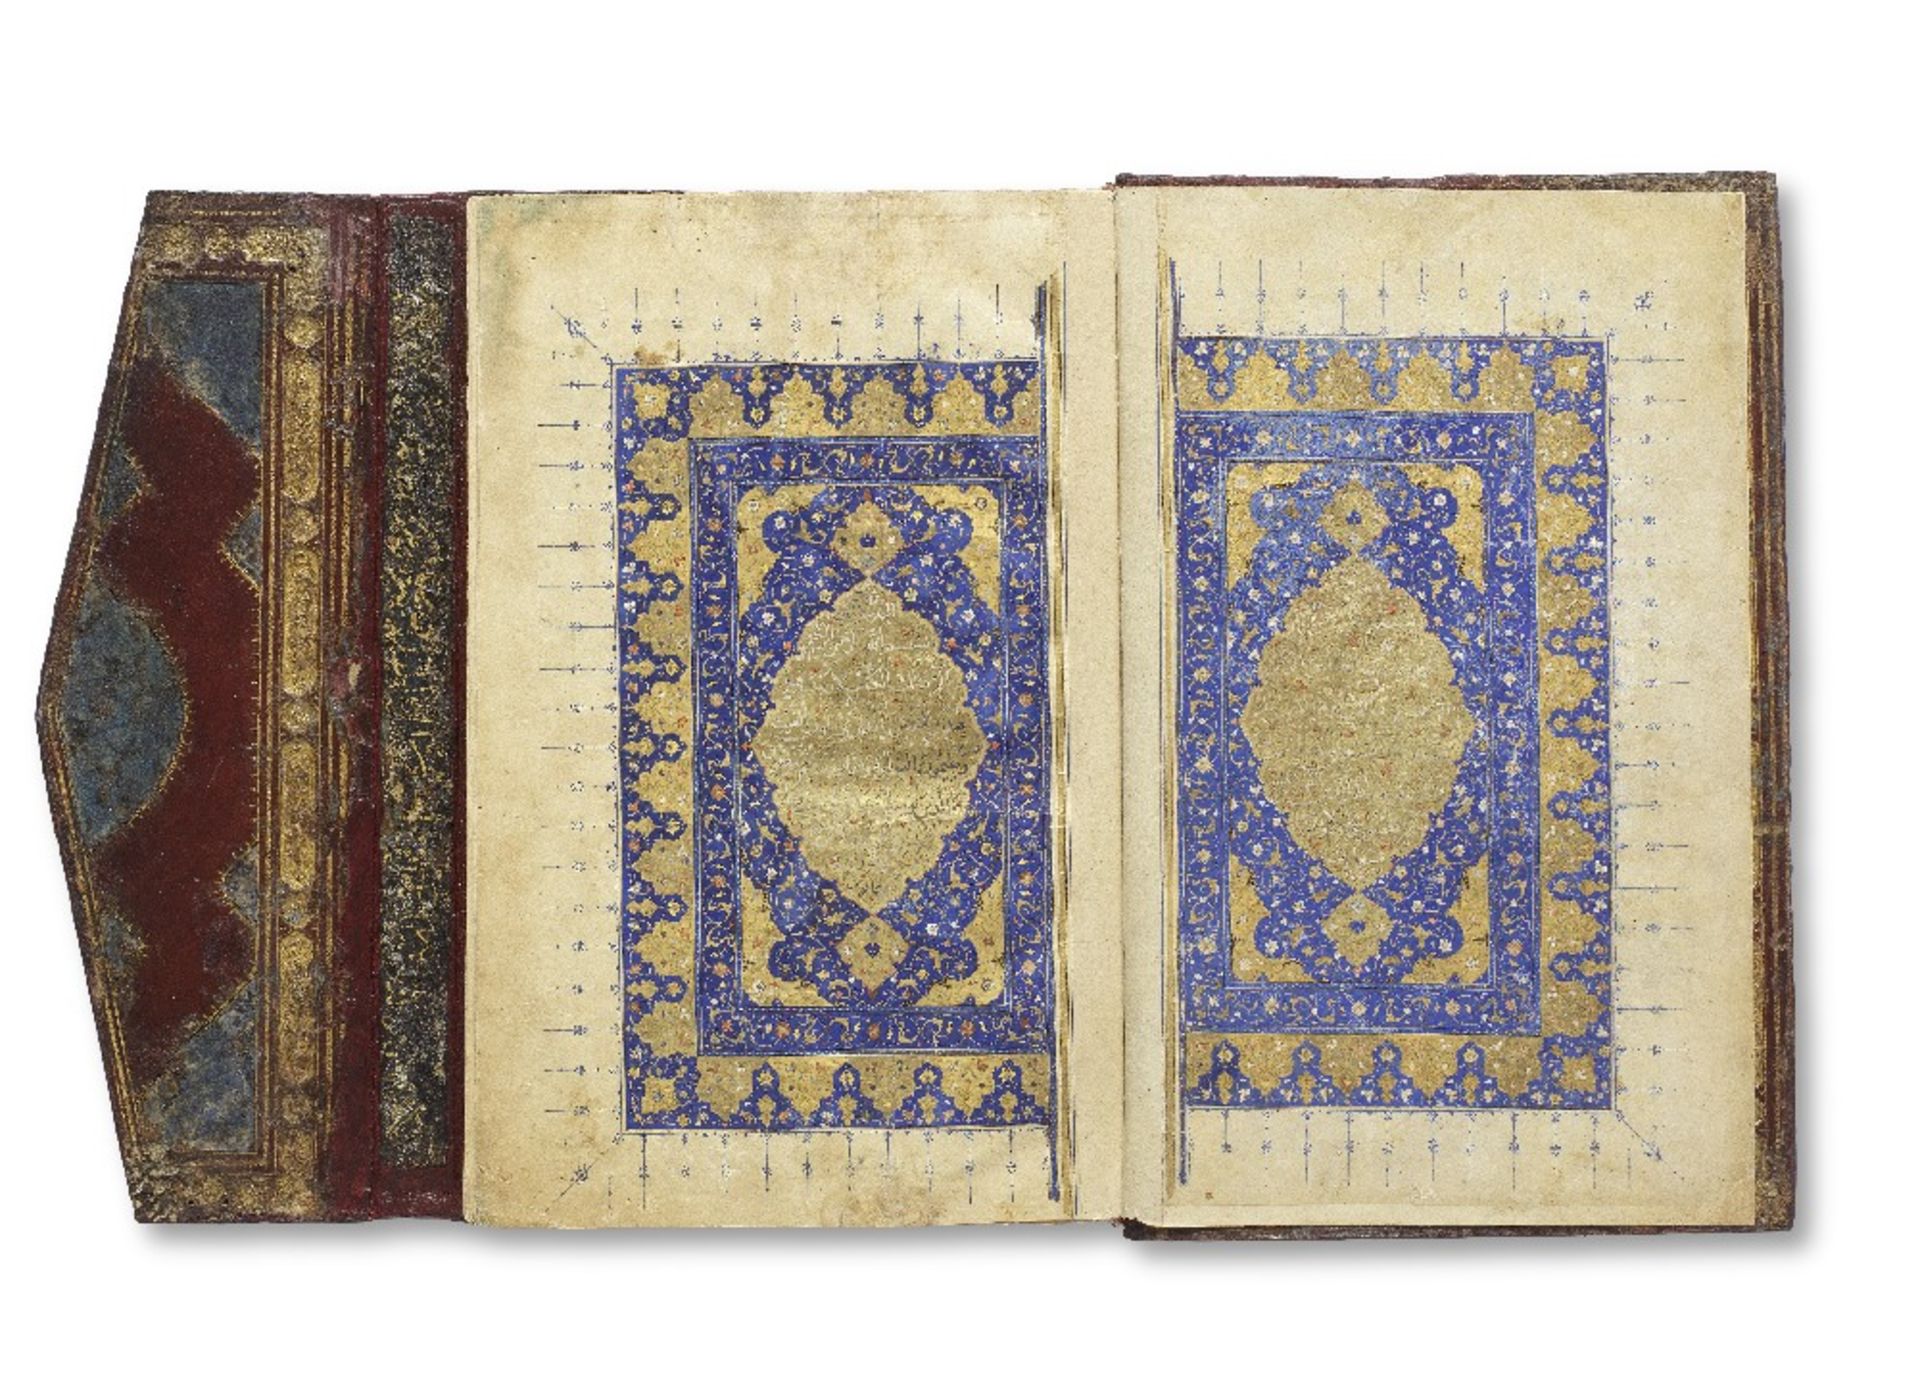 A large illuminated Safavid Qur'an Persia, early 16th Century